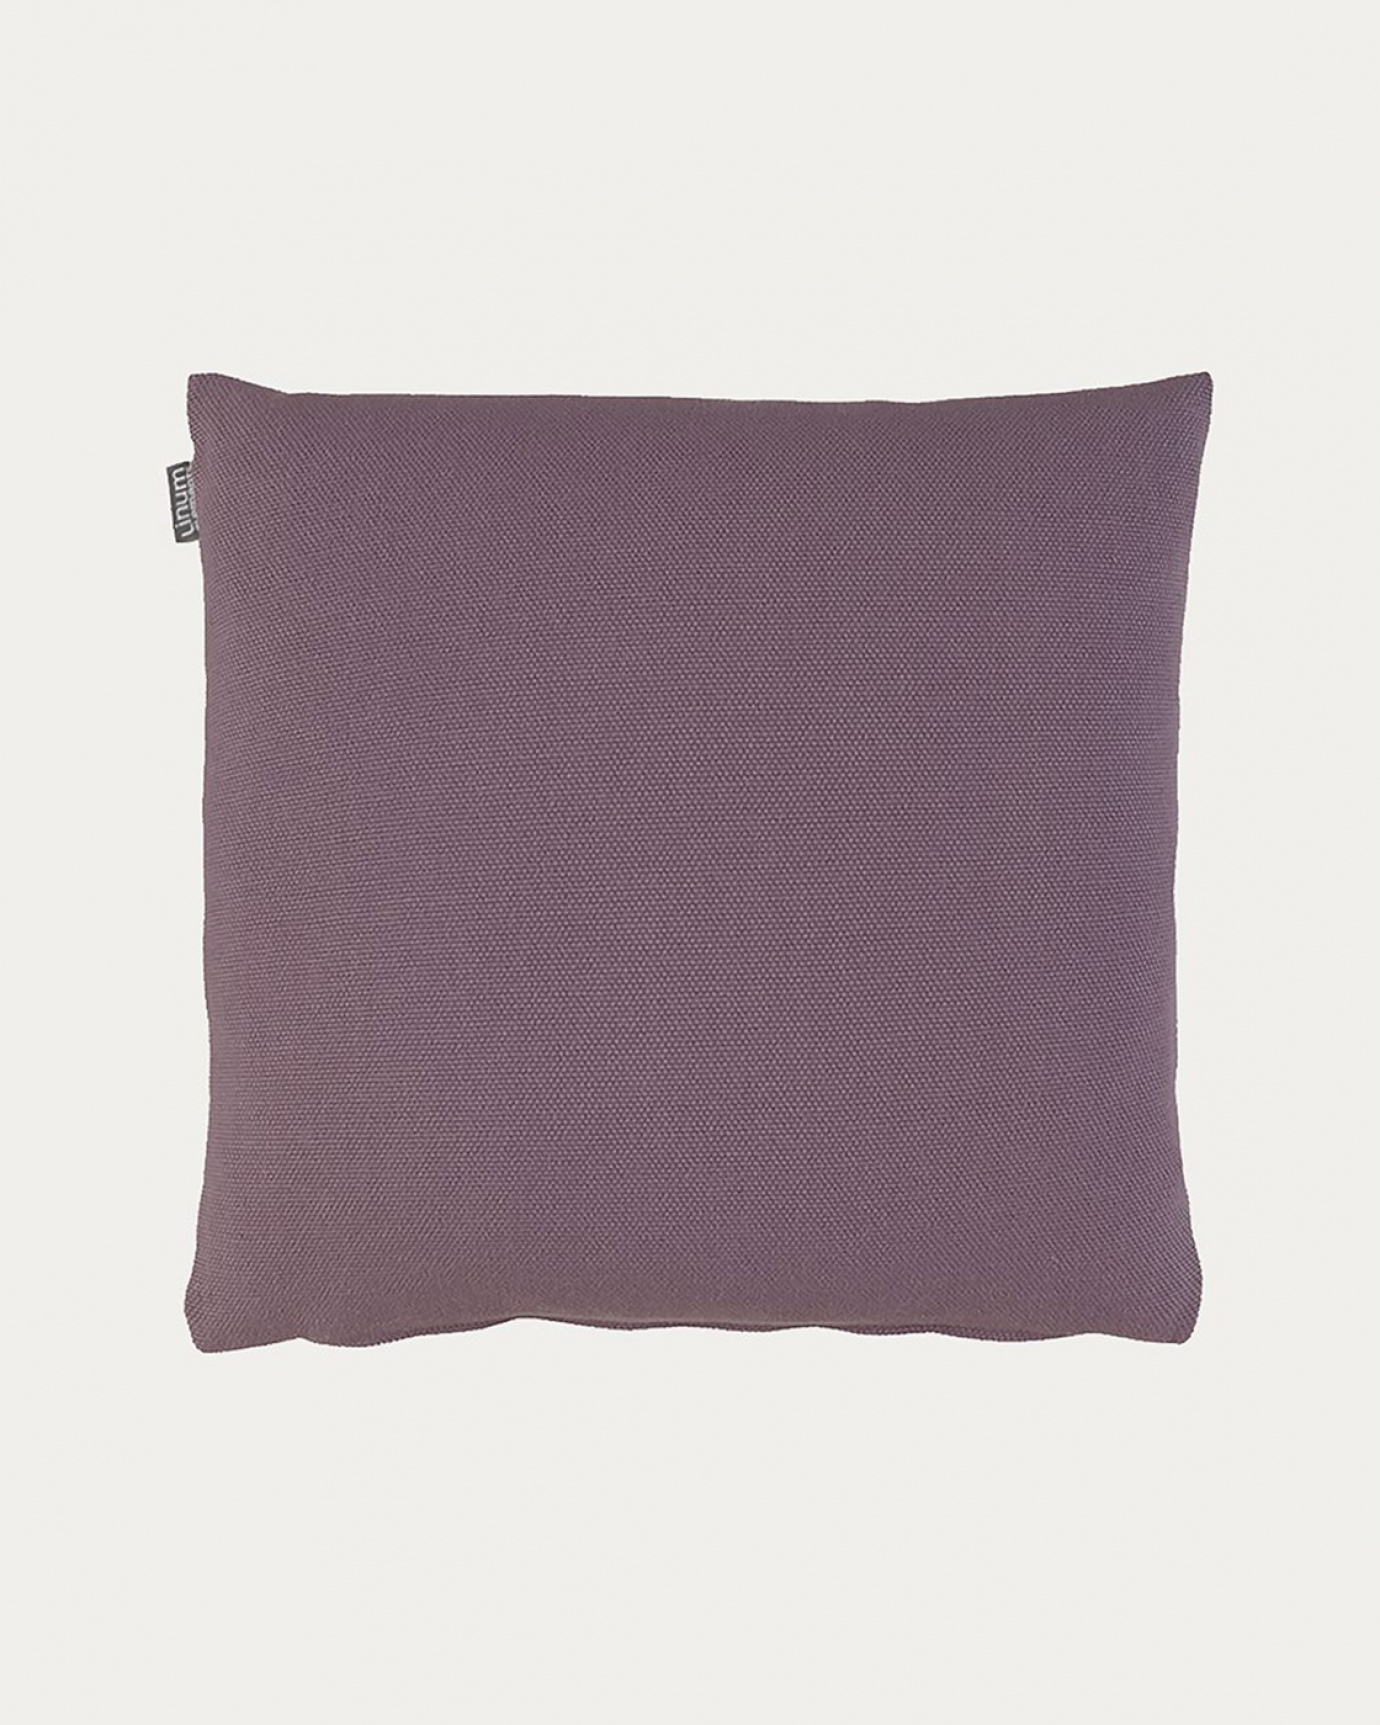 Product image dark pastel purple PEPPER cushion cover made of soft cotton from LINUM DESIGN. Easy to wash and durable for generations. Size 50x50 cm.